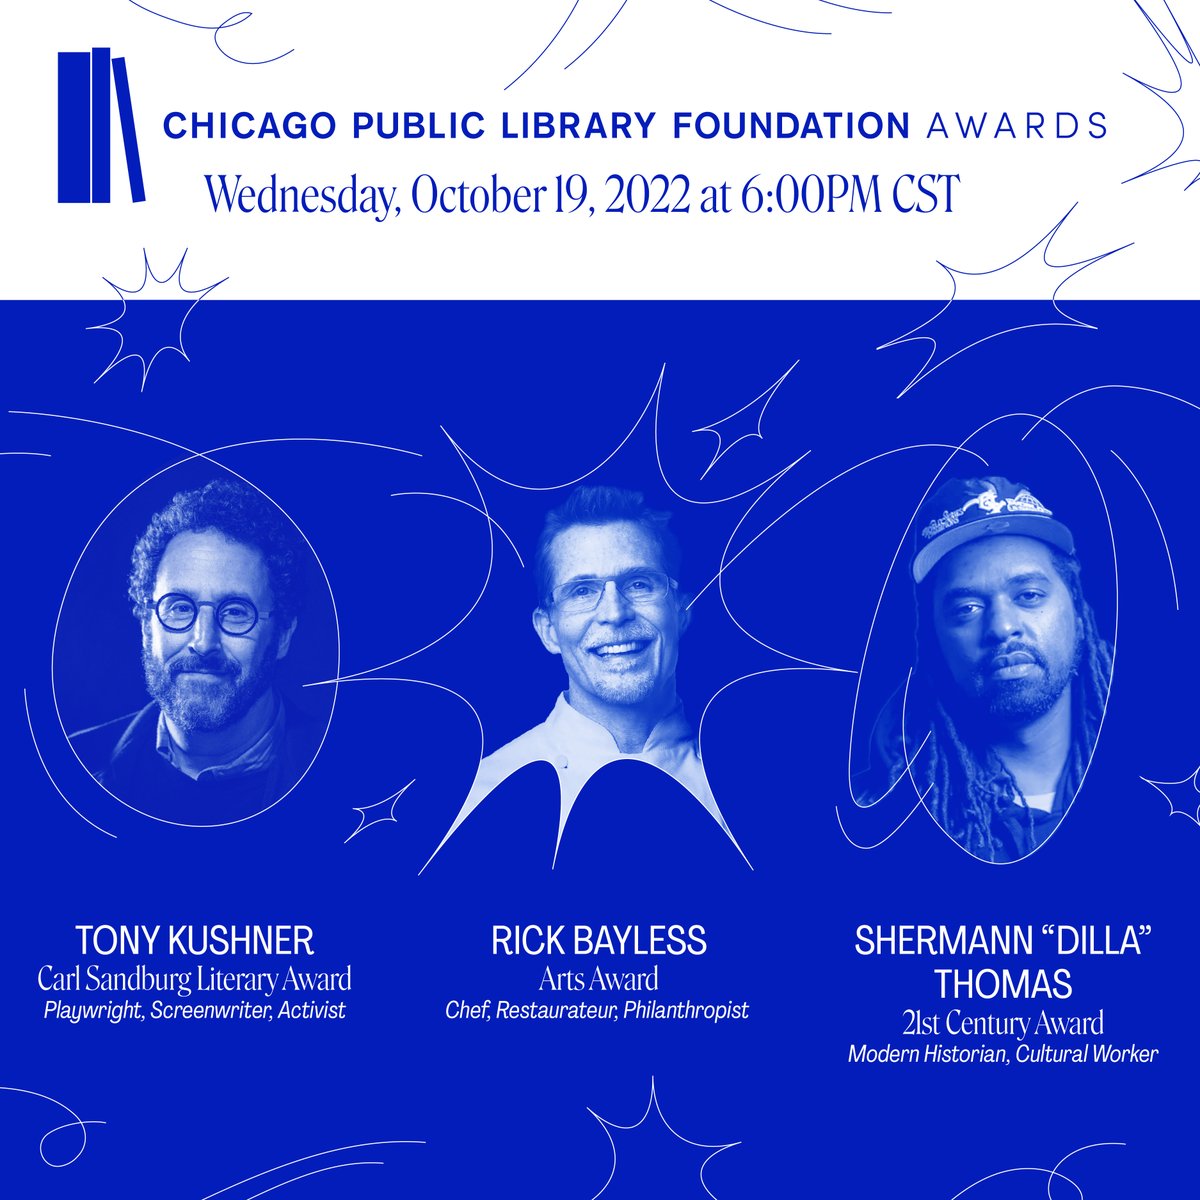 Tonight is all about bold stories, bold voices and our bold Chicago Public Library. Tune in to the @CPLFoundation Awards at 6 p.m. to honor Tony Kushner, @Rick_Bayless and @6figga_dilla and together, let’s celebrate the impact of the library. Visit cplfoundation.org/awards.